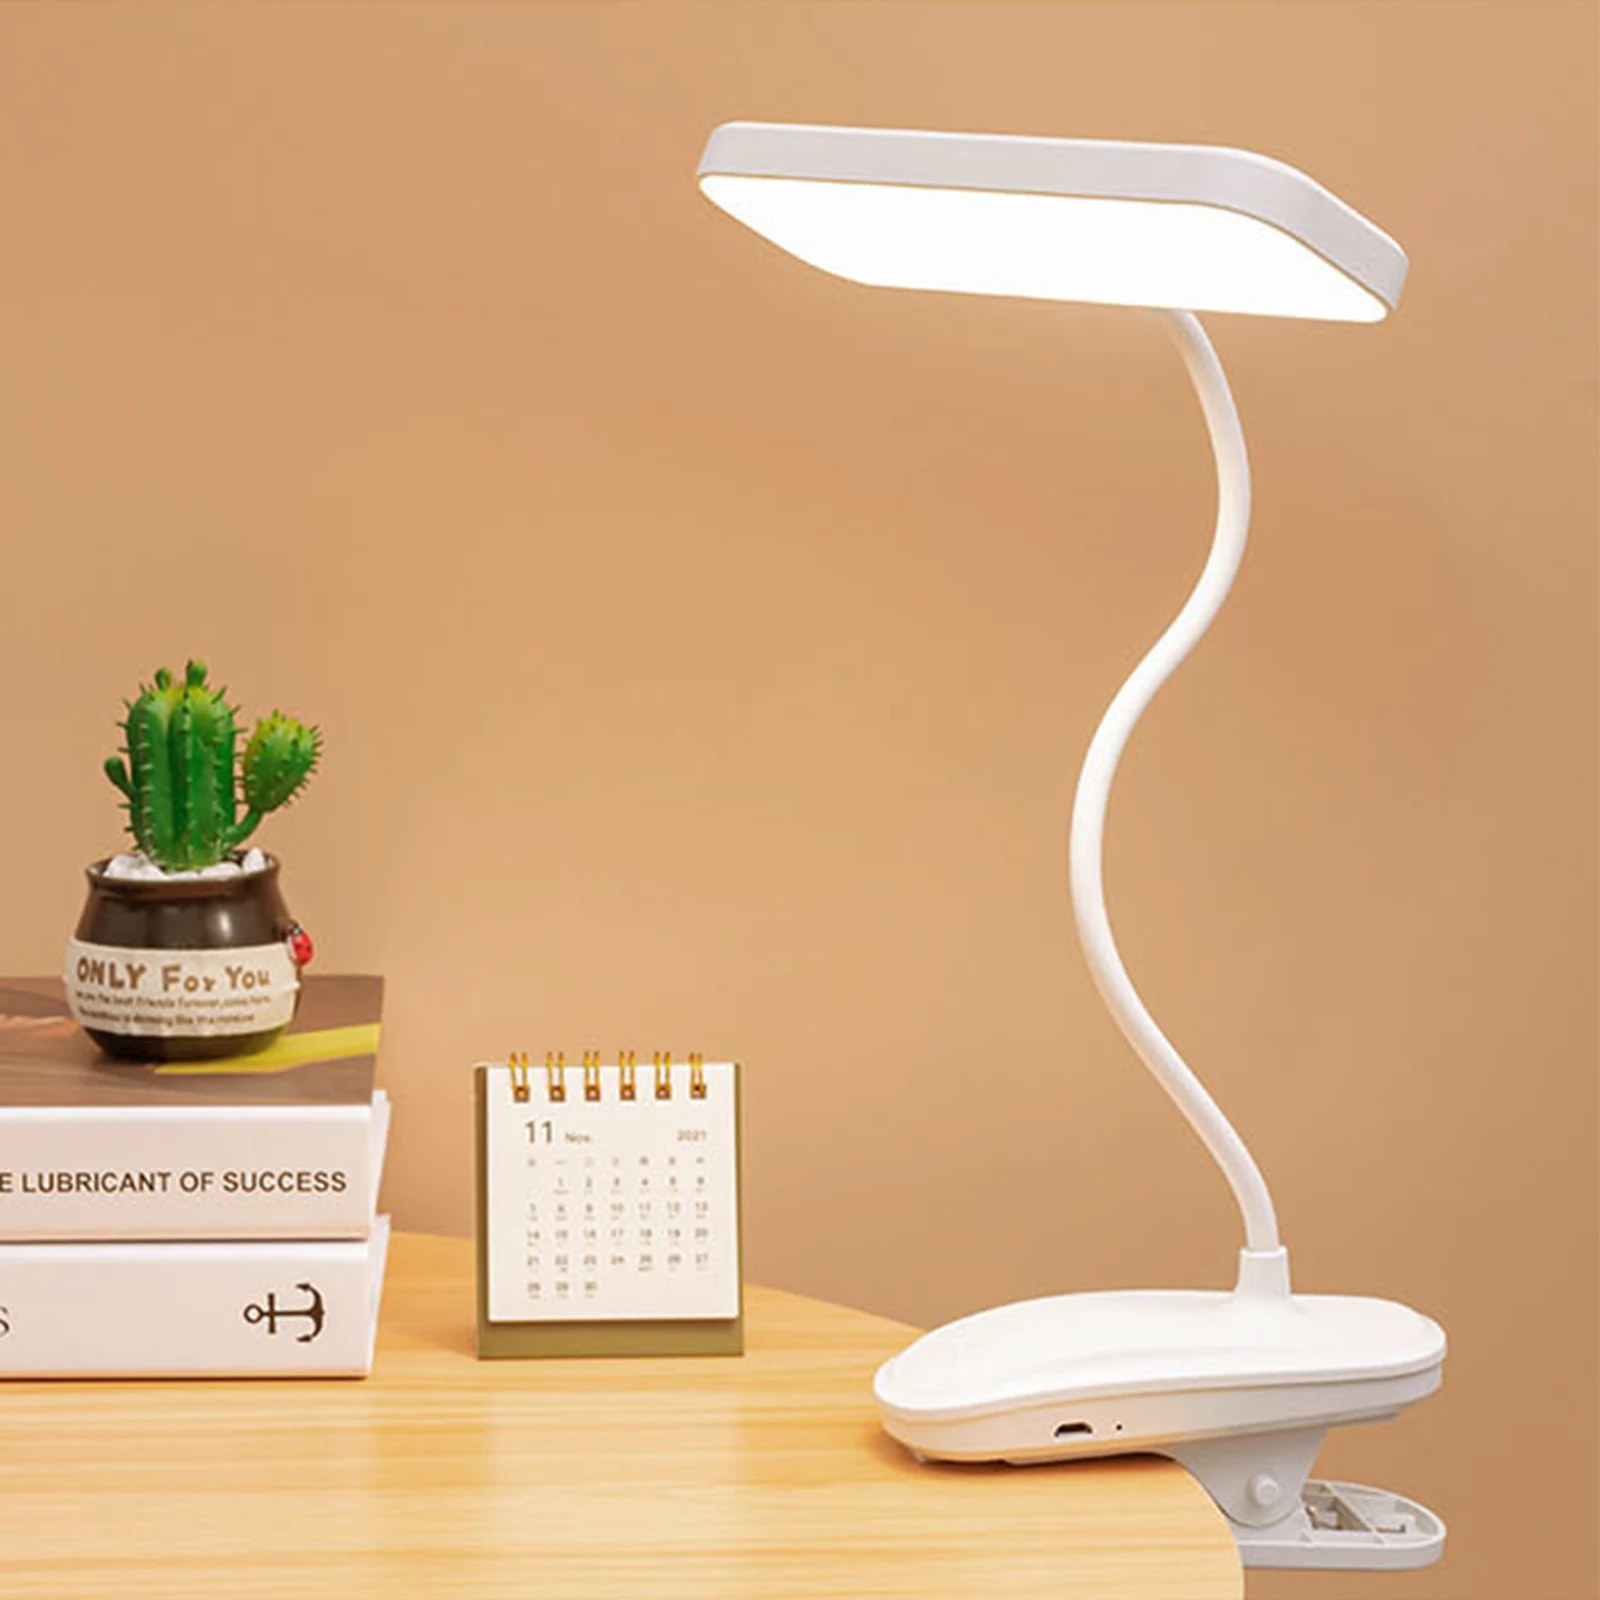 

LED Desk Lamp with Clip Modern Desk Light Rechargeable Reading Lamp Eye Protection Stepless Dimming for Working Reading Studying